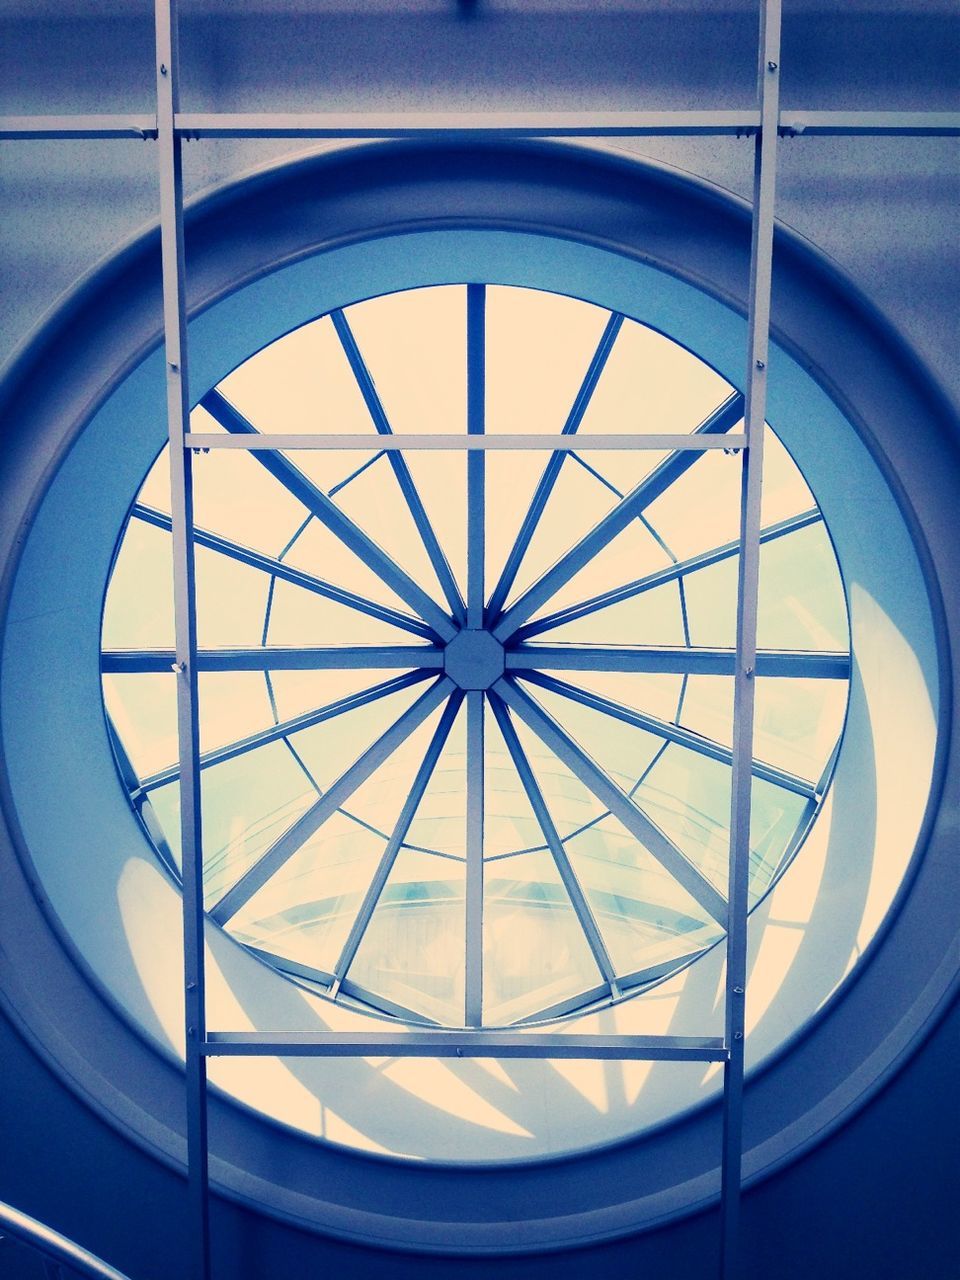 indoors, circle, geometric shape, architecture, built structure, low angle view, pattern, window, glass - material, skylight, directly below, shape, ceiling, design, transparent, architectural feature, no people, spiral staircase, metal, full frame